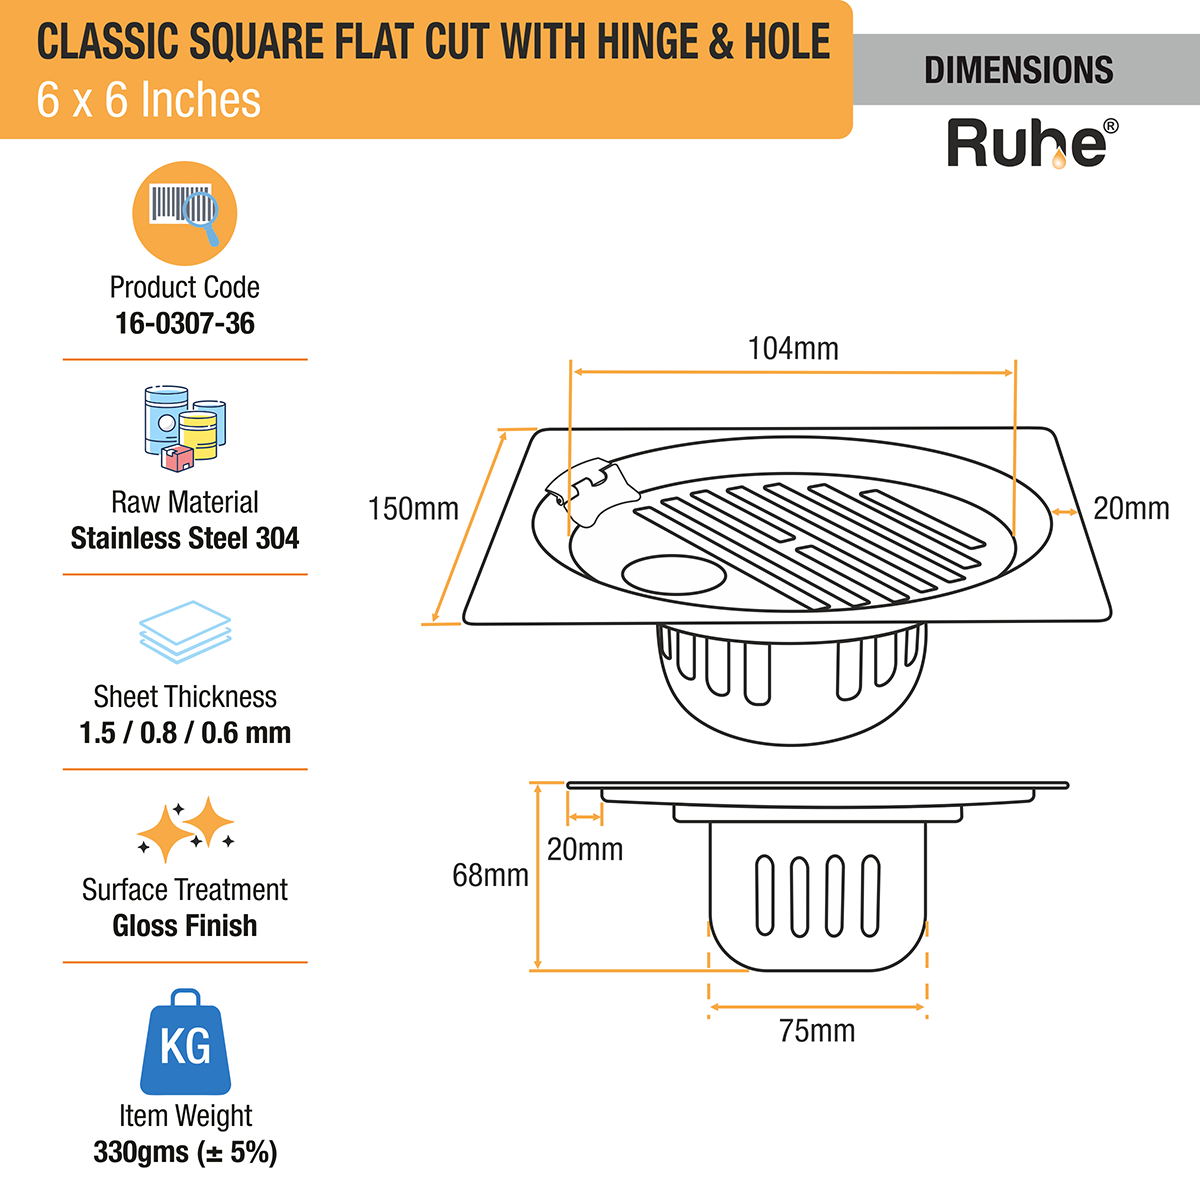 Classic Square Flat Cut Floor Drain (6 x 6 Inches) with Hinge, Hole and Cockroach Trap (304 Grade) dimensions and size